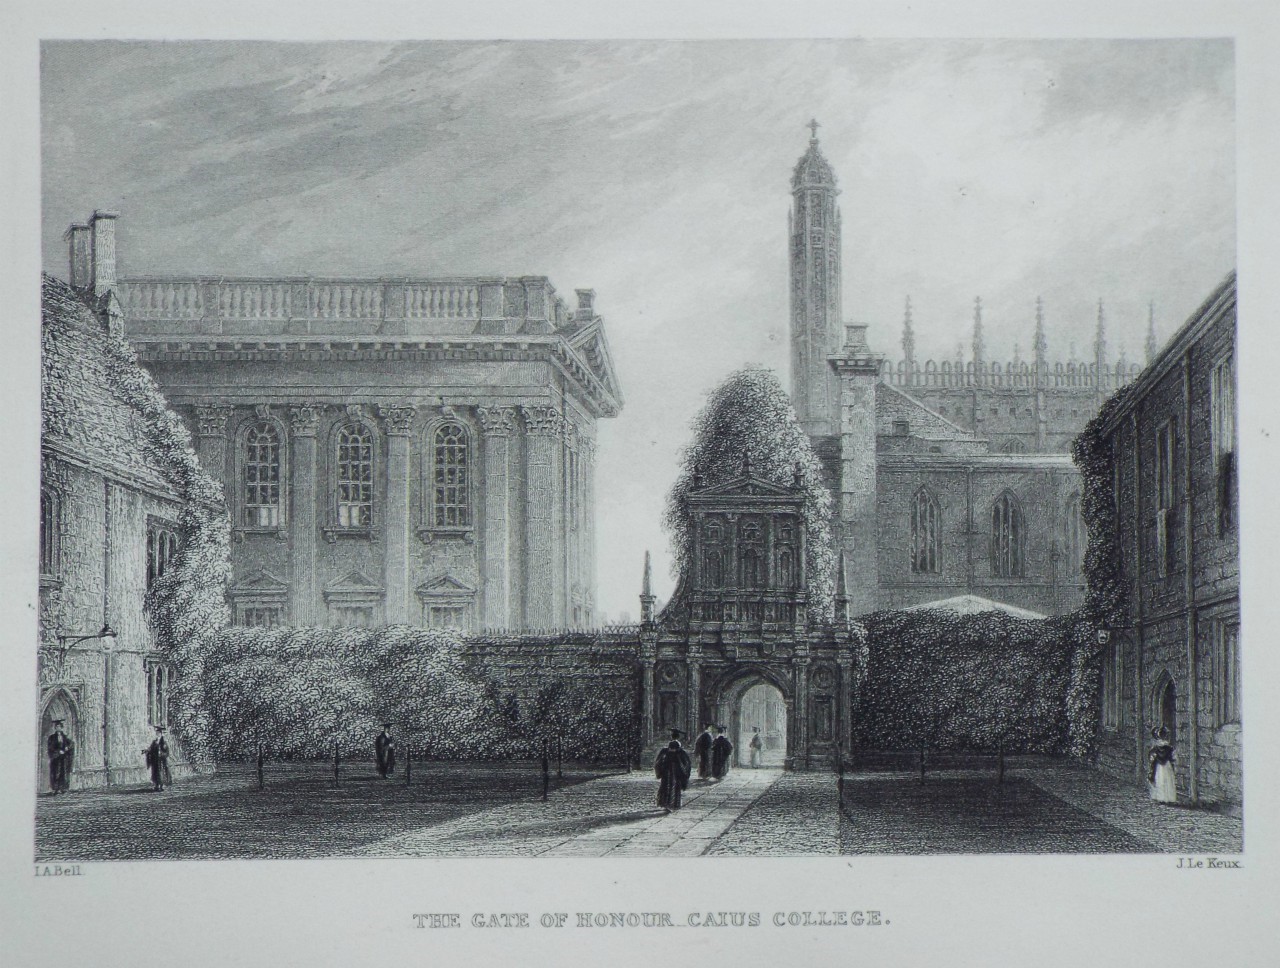 Print - The Gate of Honour, Caius College. - Le